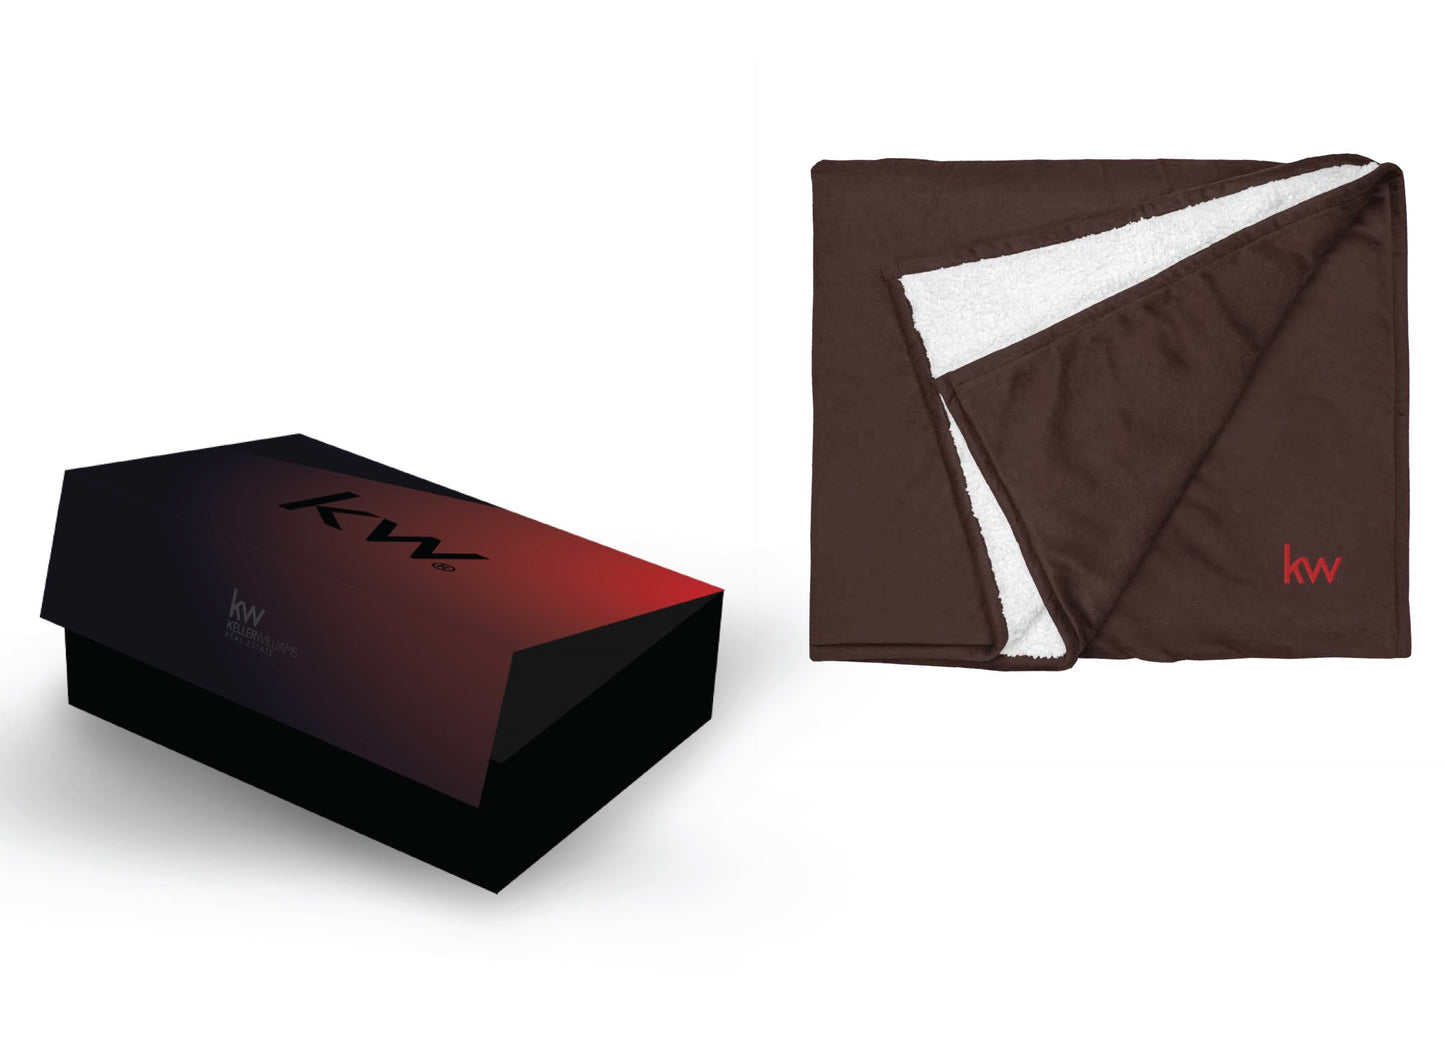 KW Branded Closing Gift Box with Branded Blanket (from $$91 per complete box)